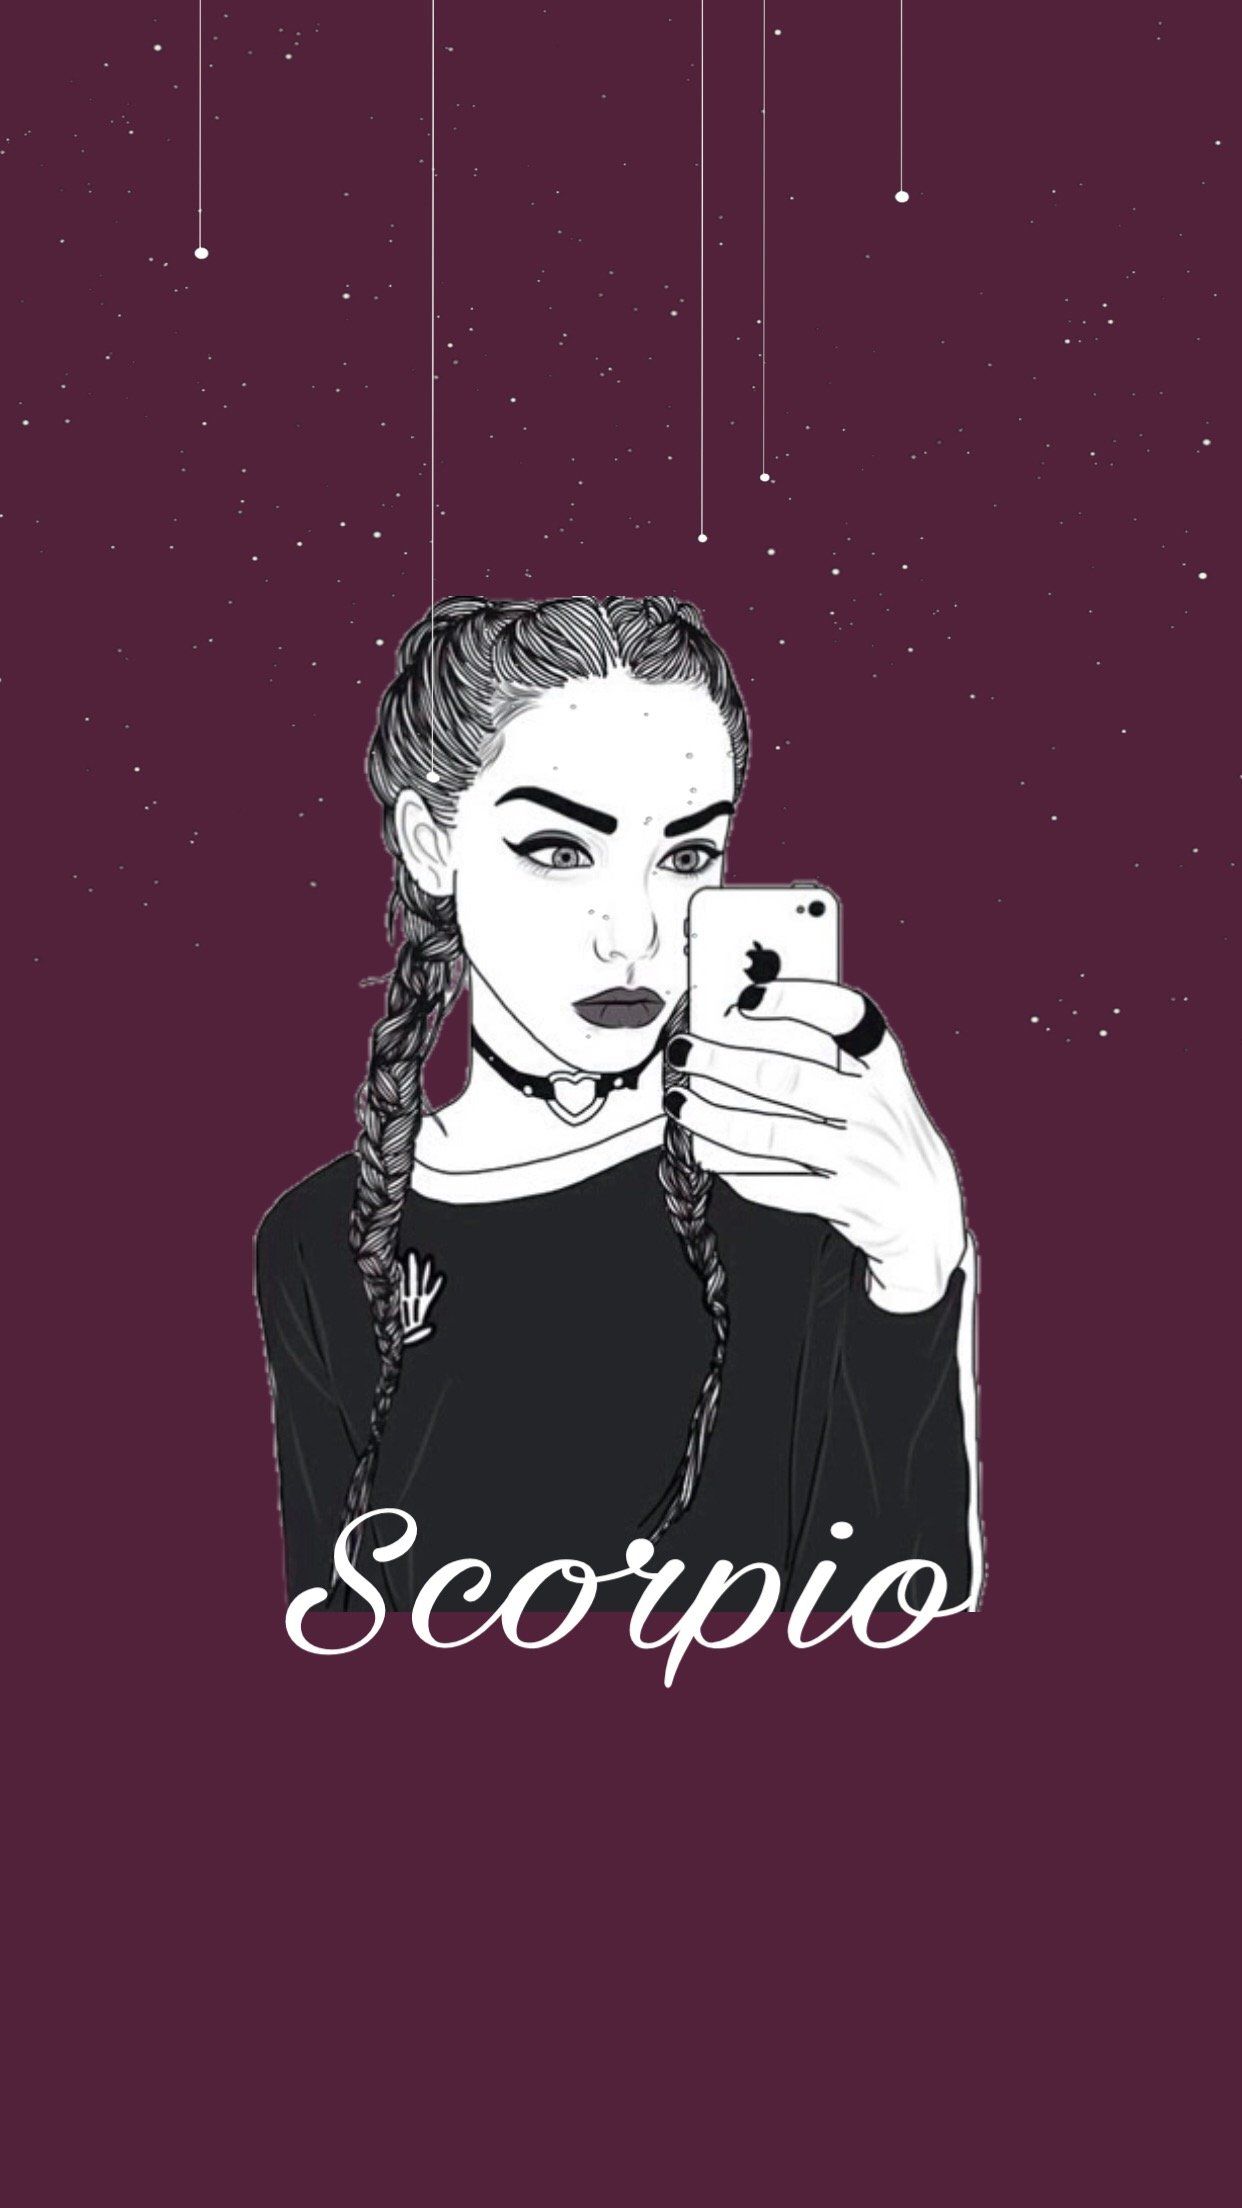 A woman holding her phone and looking at the sky with stars - Scorpio